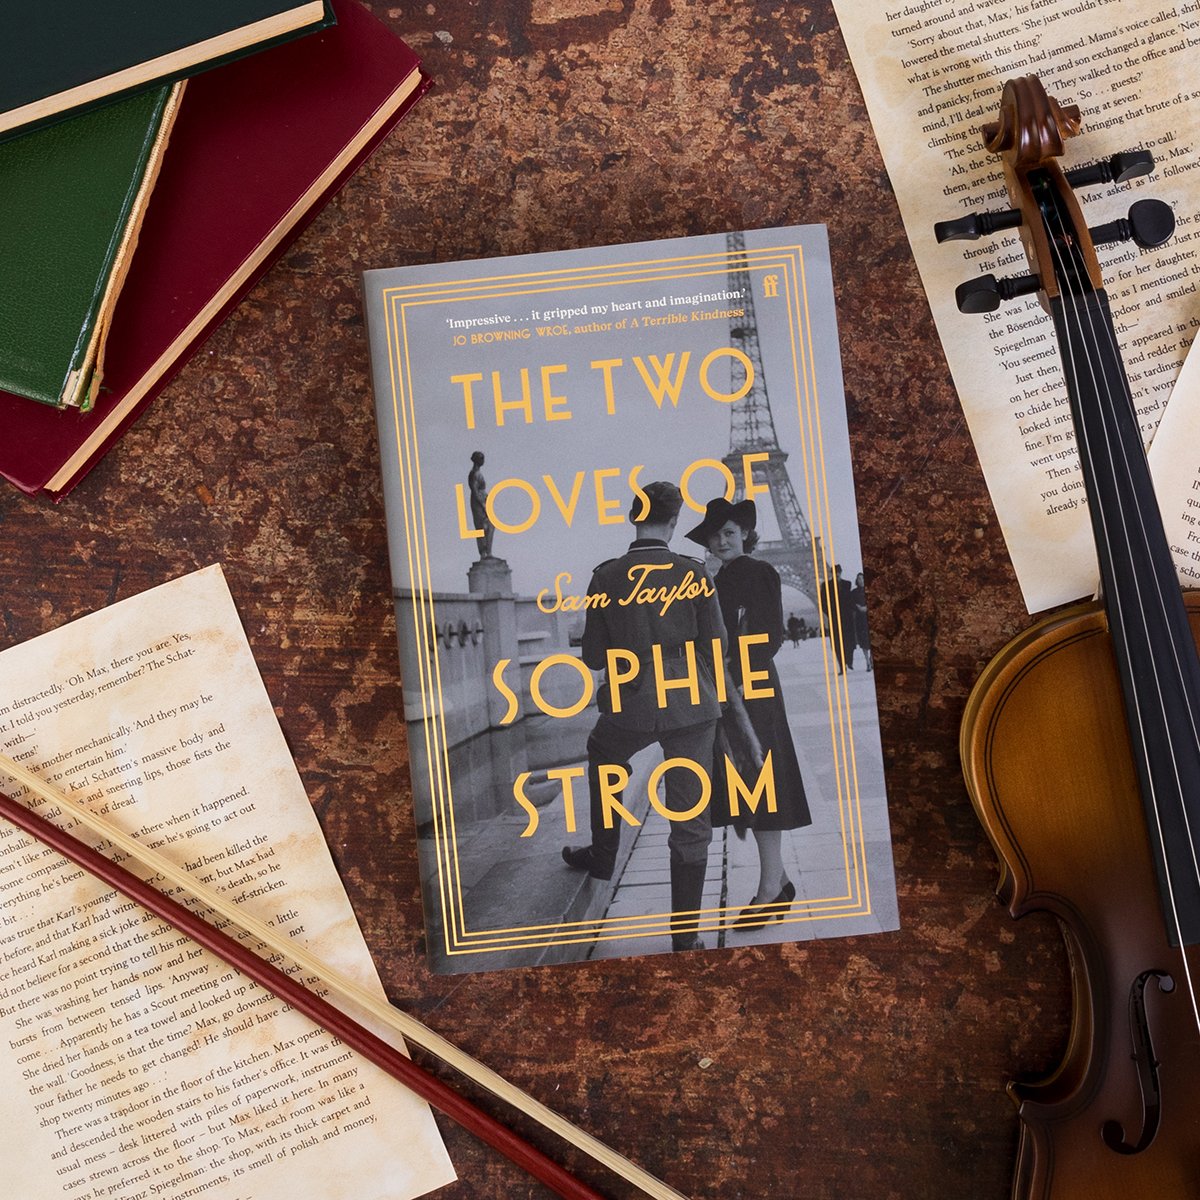 'I love books that feel real but possess that fairytale-like facet of opening a door in reality, through which the reader can step into an impossible land.' @SamTaylorwrites on eight books that inspired The Two Loves of Sophie Strom for @bookshop_org_UK. uk.bookshop.org/lists/sam-tayl…